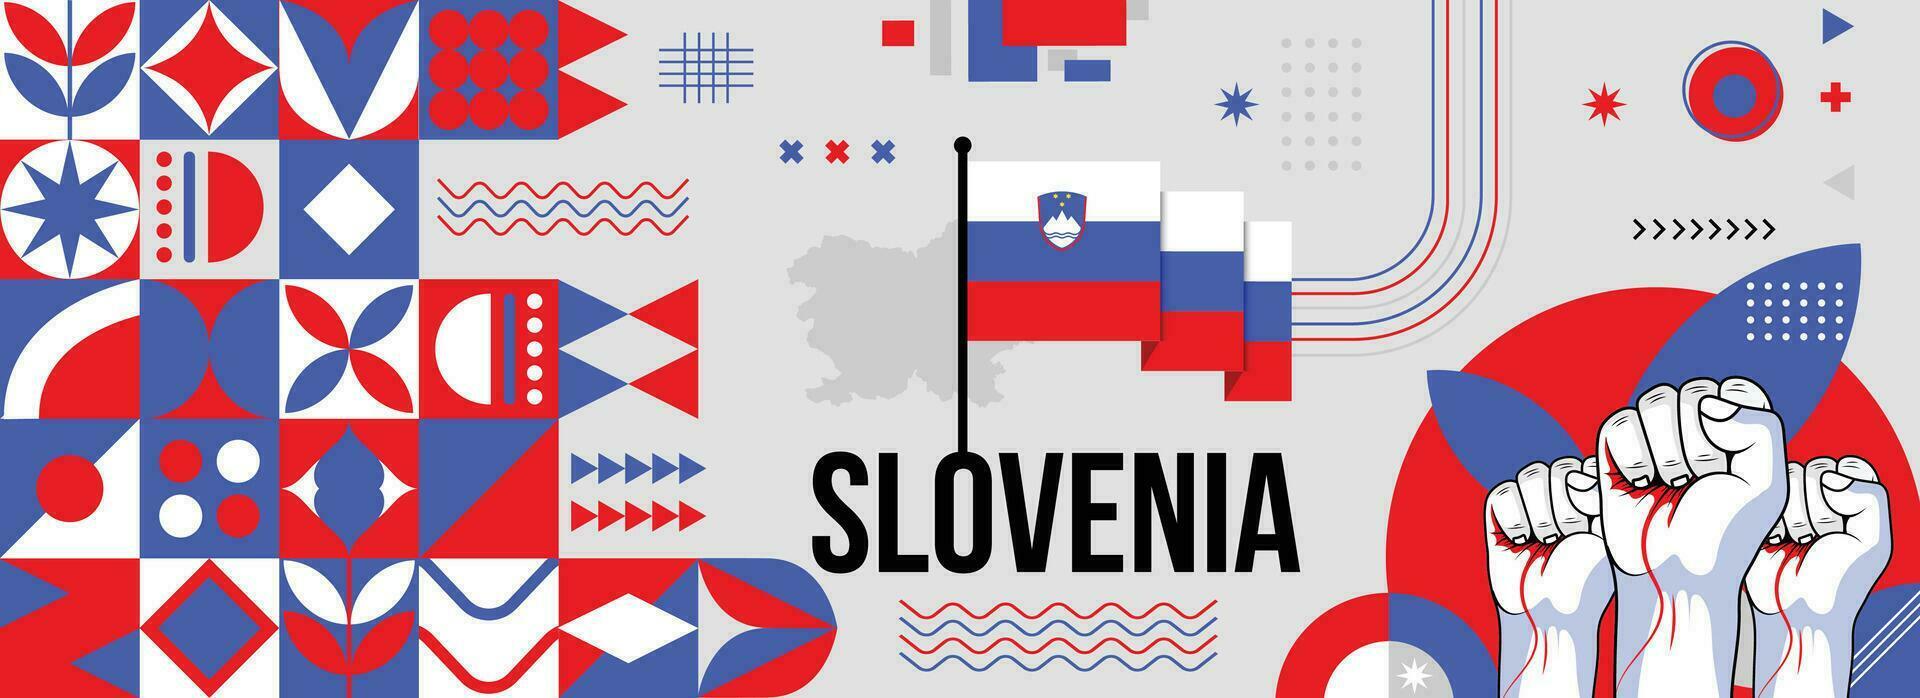 Slovenia national or independence day banner for country celebration. Flag and map of Slovenia with raised fists. Modern retro design with typorgaphy abstract geometric icons. Vector illustration